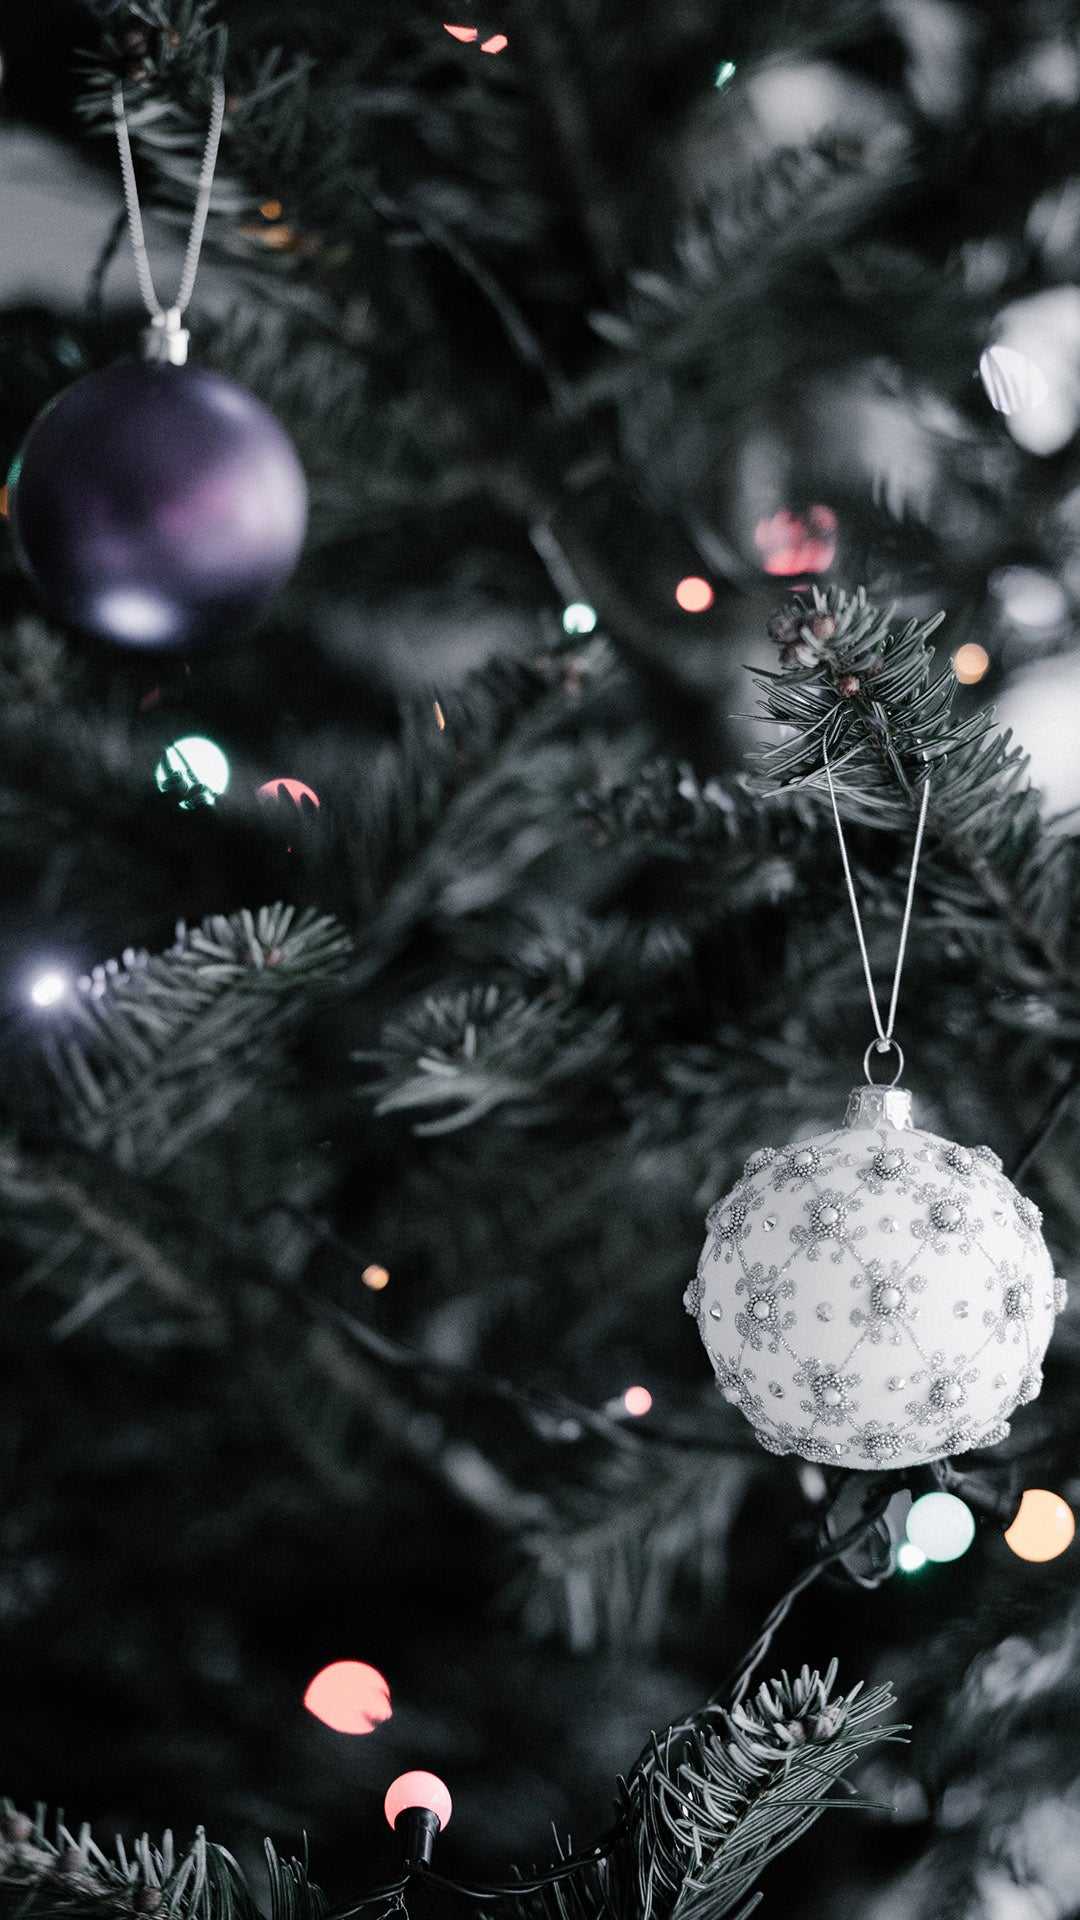 IPhone wallpaper with a close up of a Christmas tree with purple and white ornaments. - Christmas